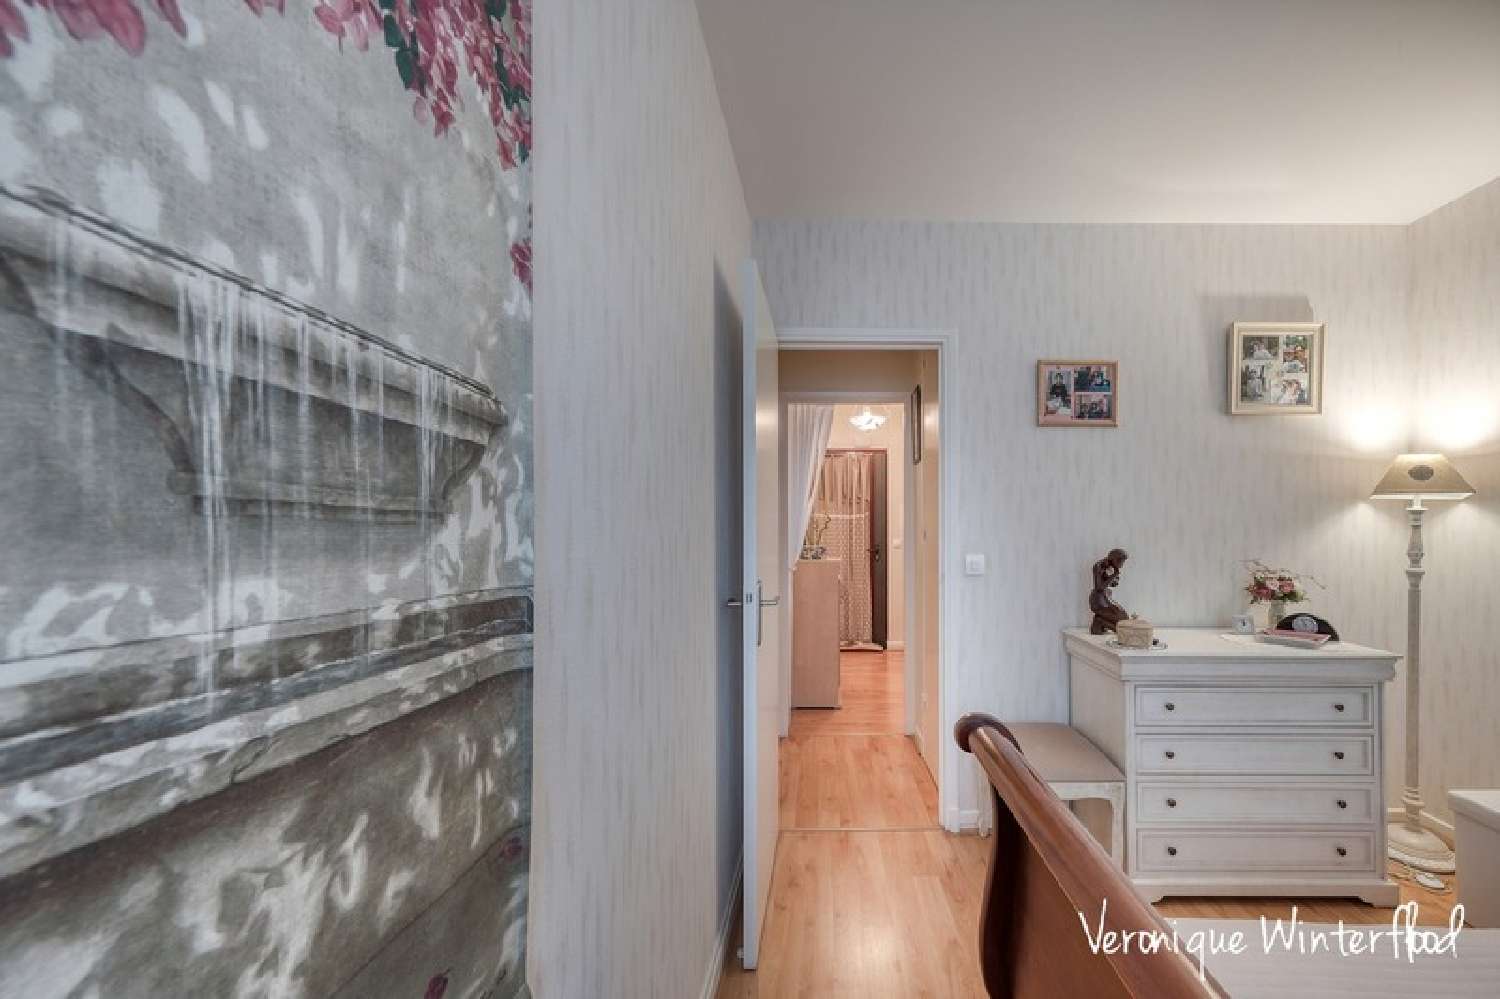  kaufen Wohnung/ Apartment Le Chesnay Yvelines 8